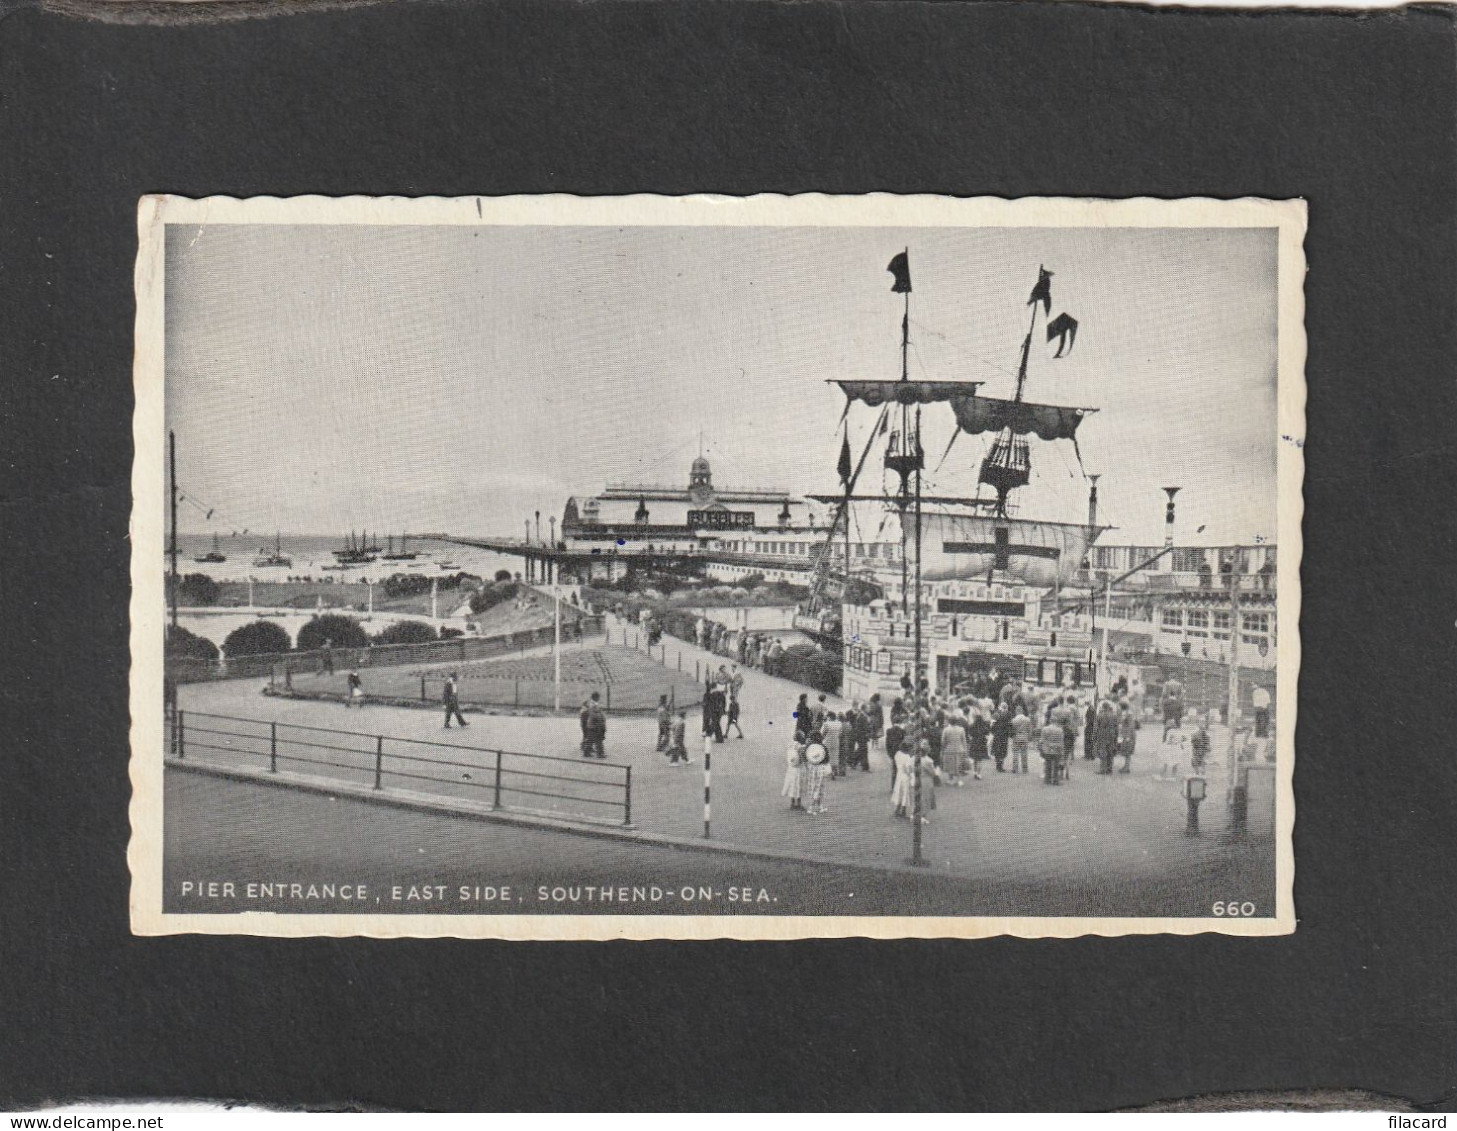 122275          Regno  Unito,   Pier   Entrance,   East  Side,   Southend-on-Sea,   VGSB  1959 - Southend, Westcliff & Leigh